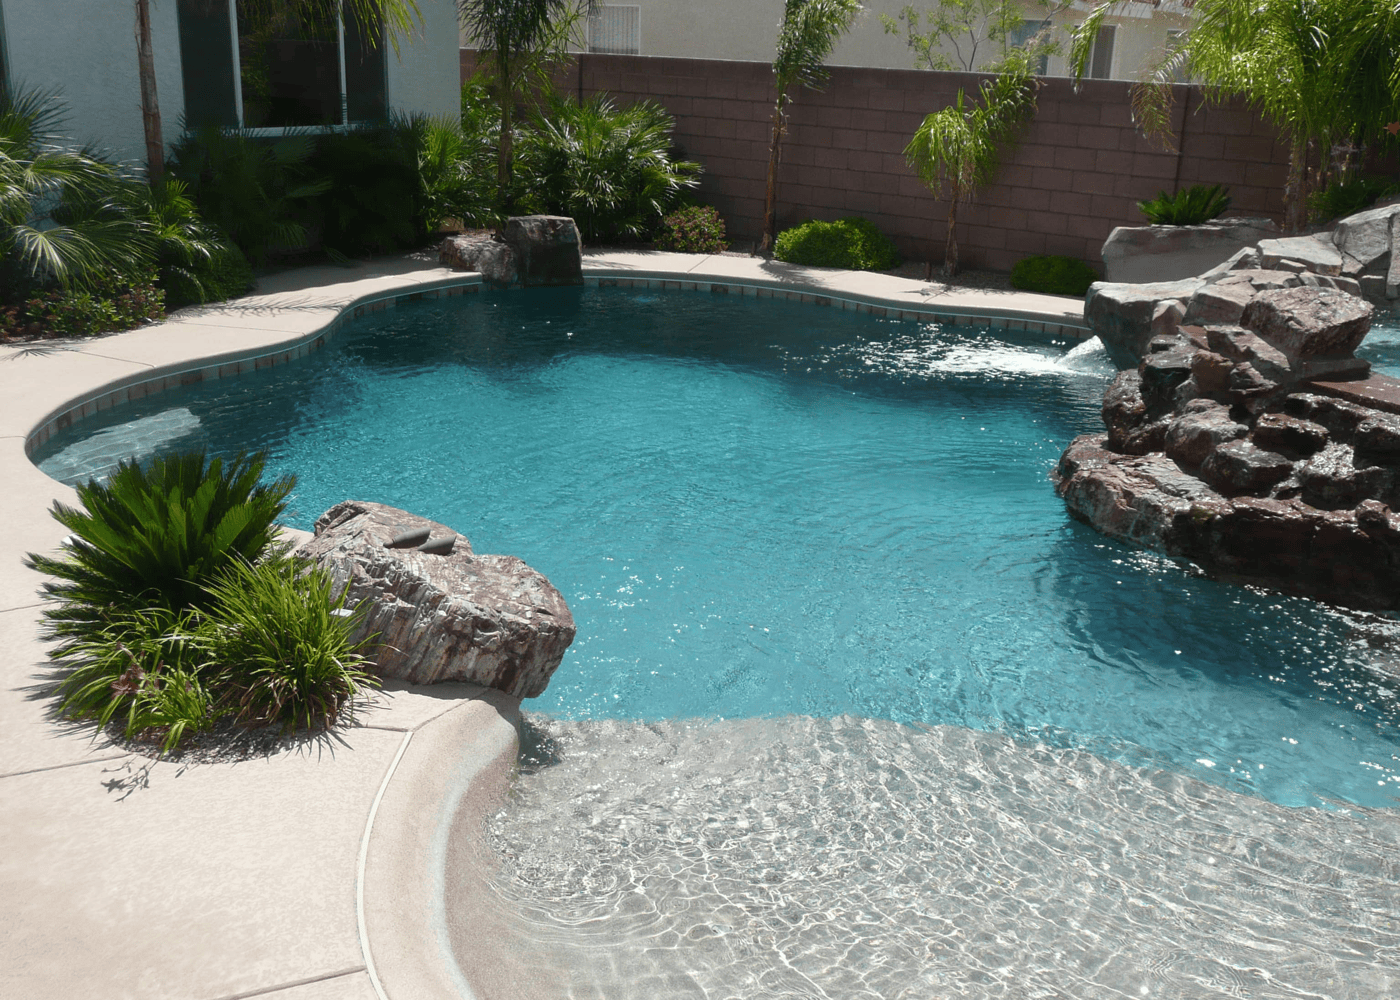 A freeform swimming pool surrounded by numerous rock features. The rocks are used for landscaping, creating a natural and scenic environment. The rocks vary in size and texture, enhancing the pool's aesthetic.